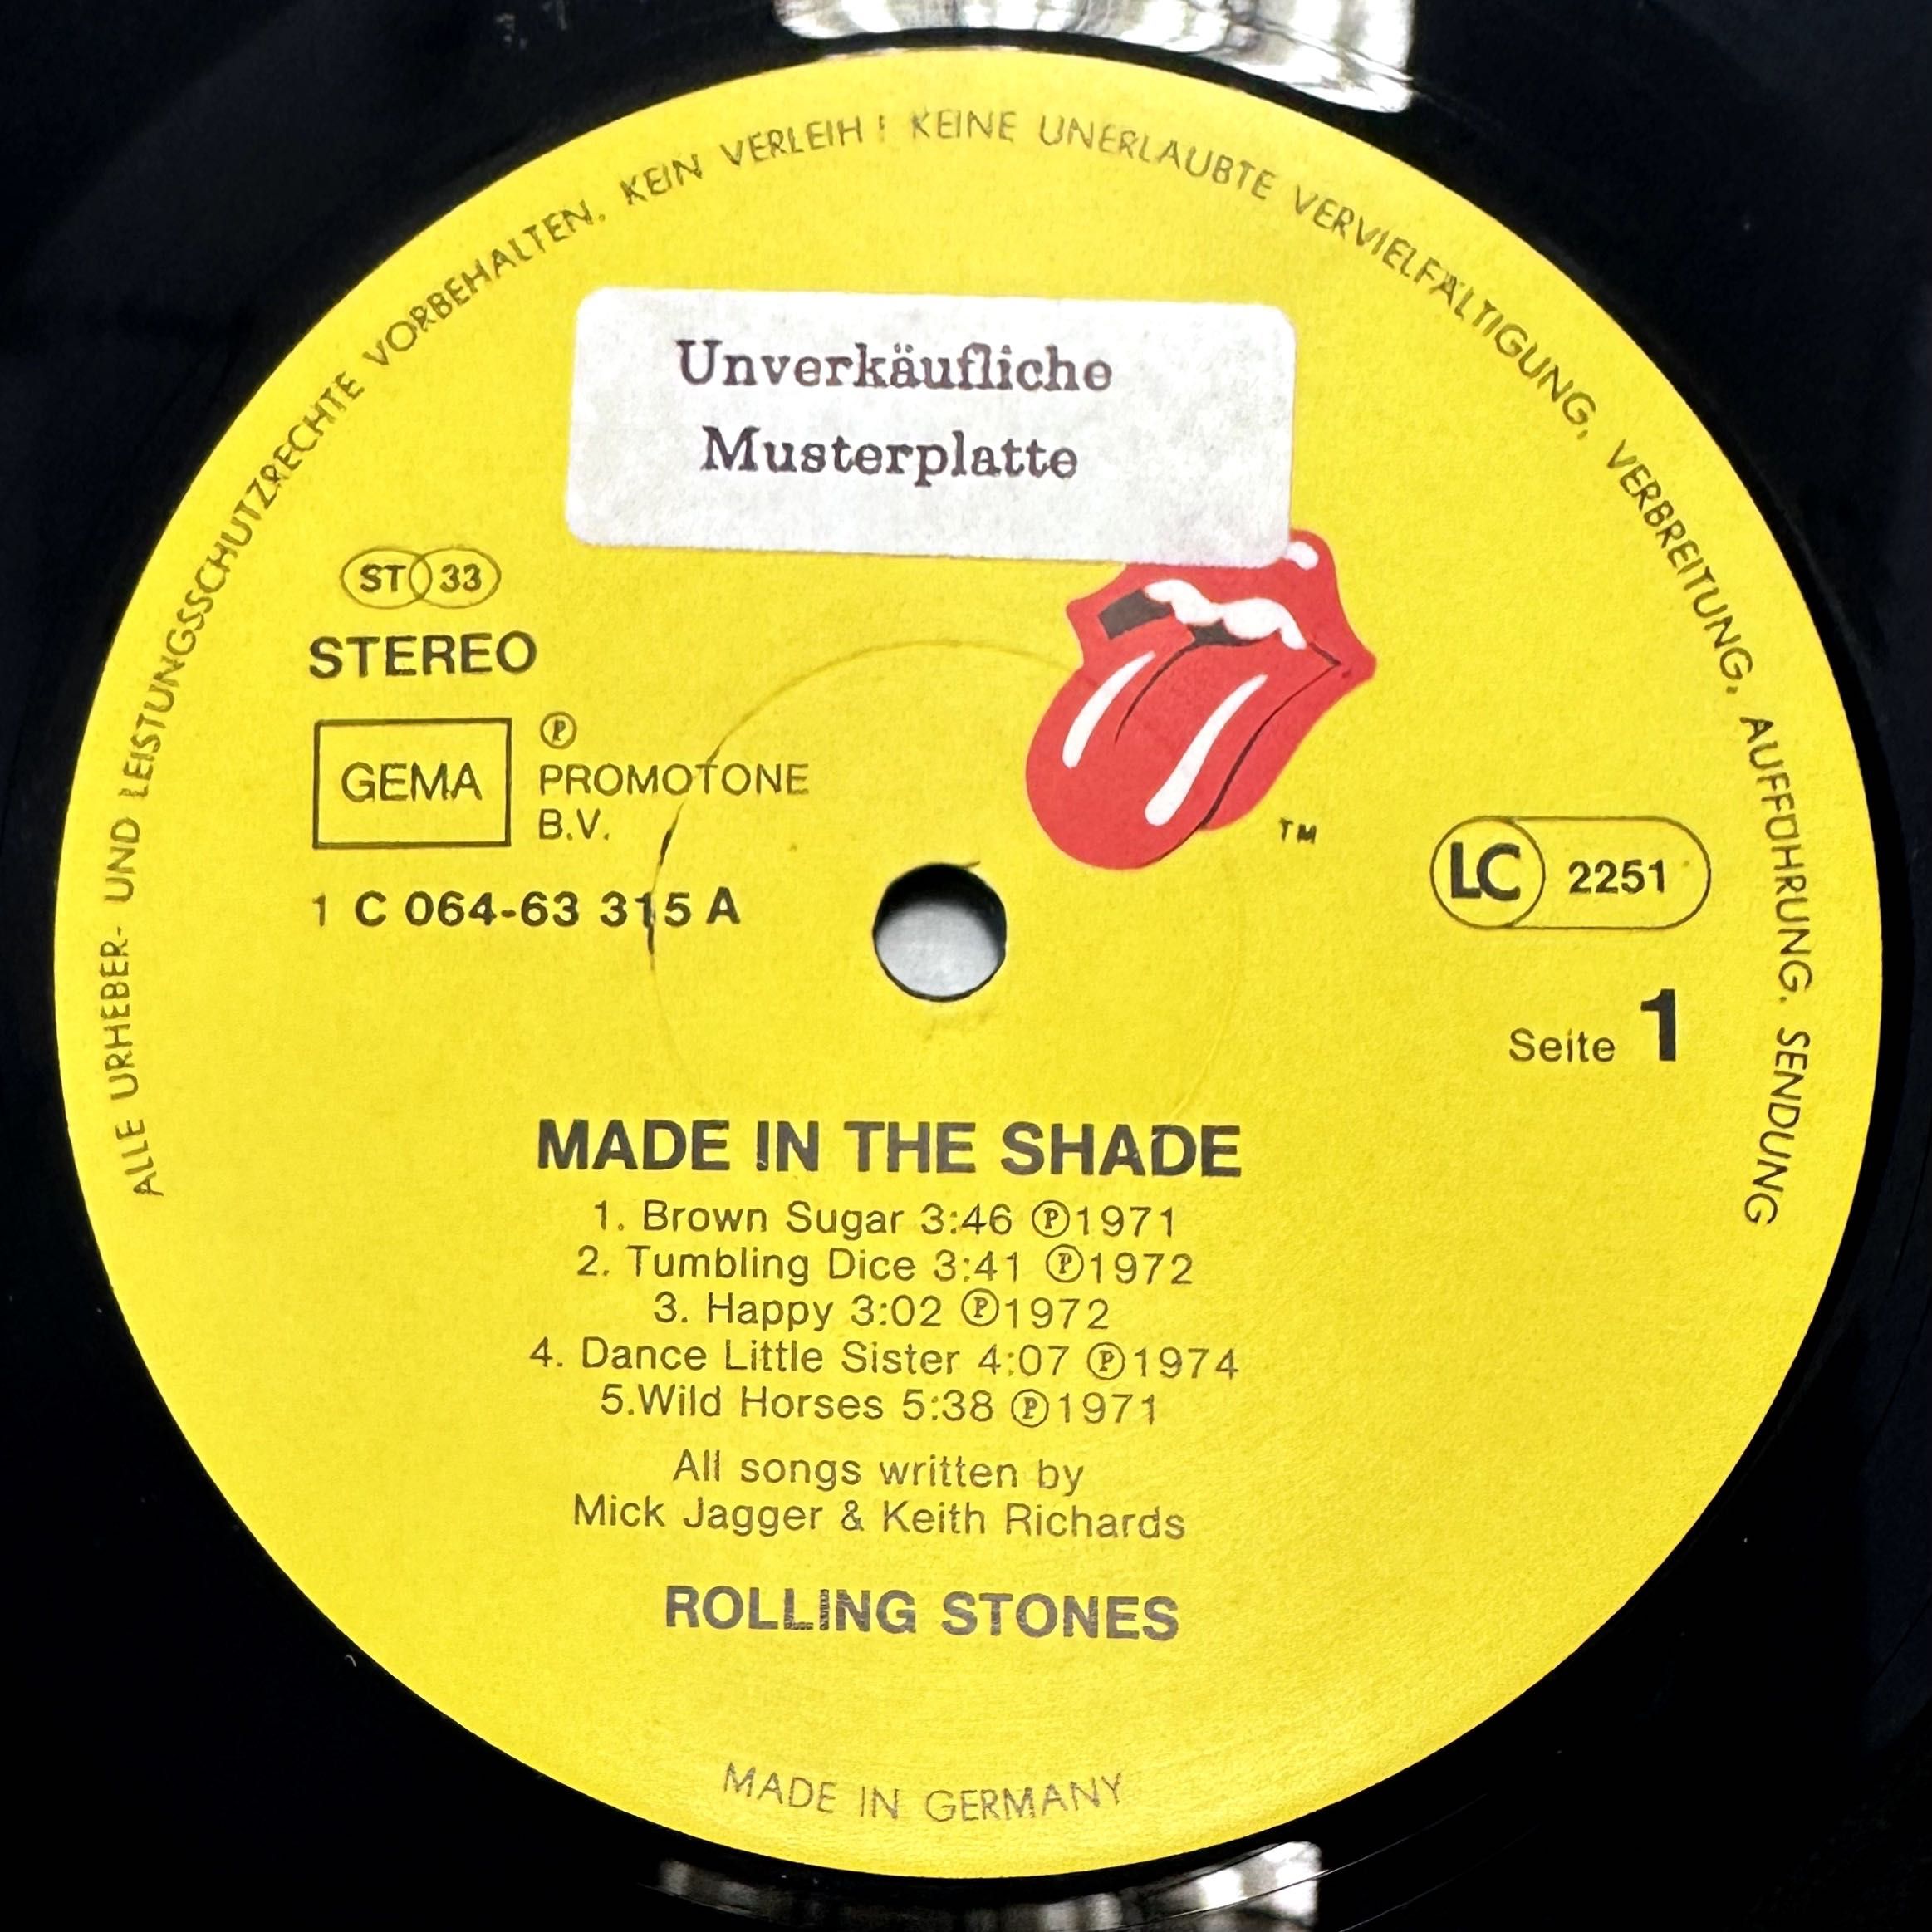 The Rolling Stones - Made in the Shade (Vinyl, 1979, Germany)